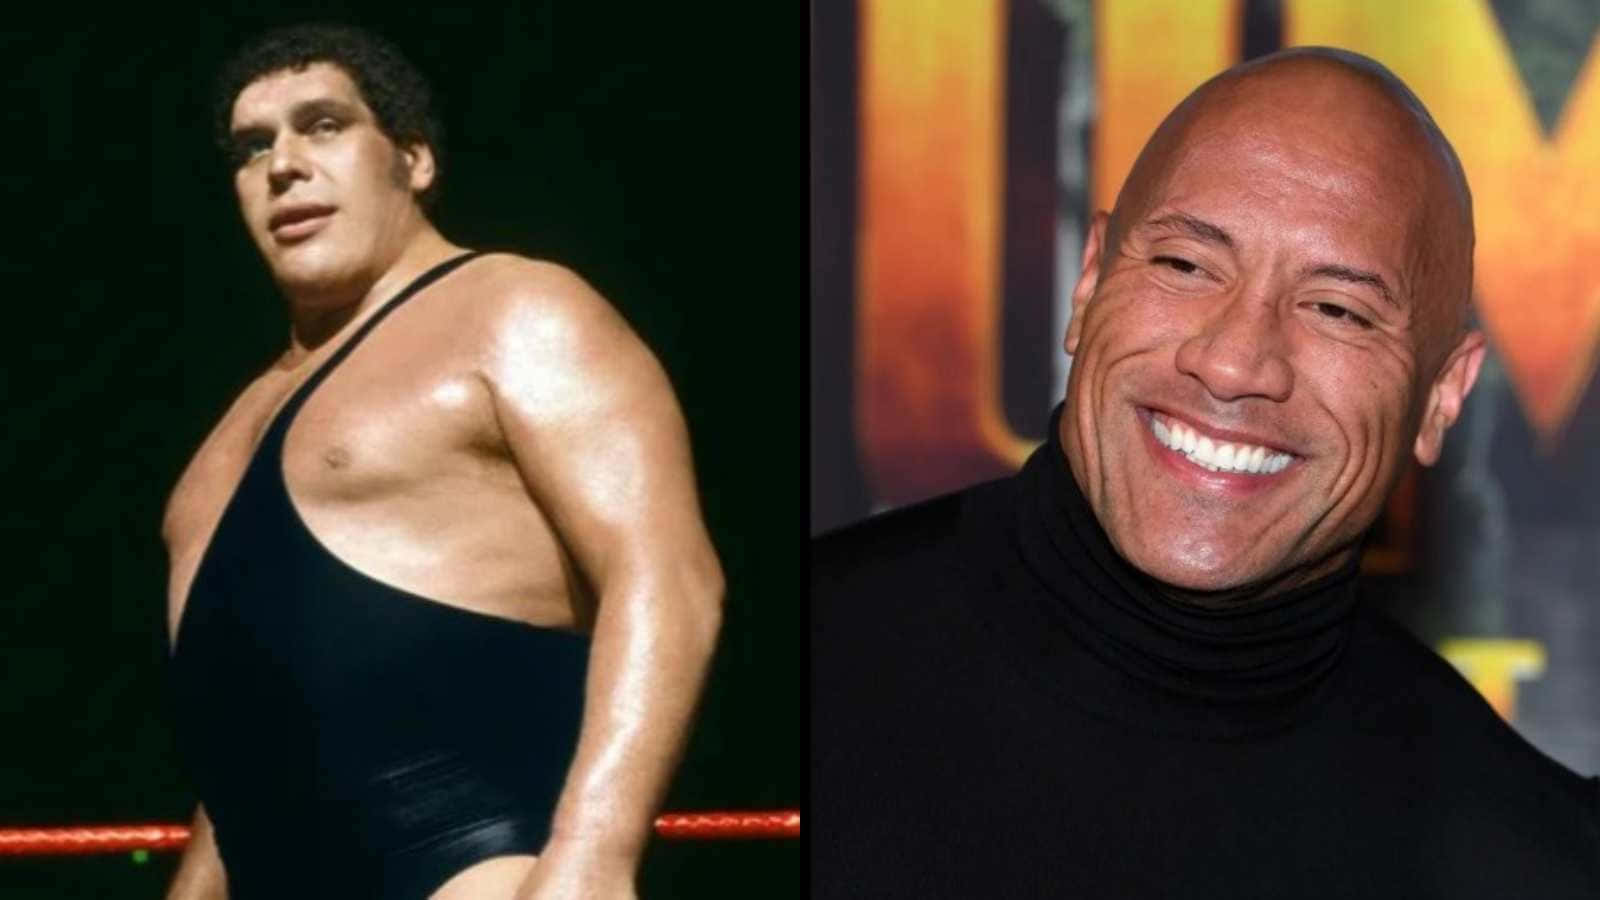 Andre The Giant And The Rock Background